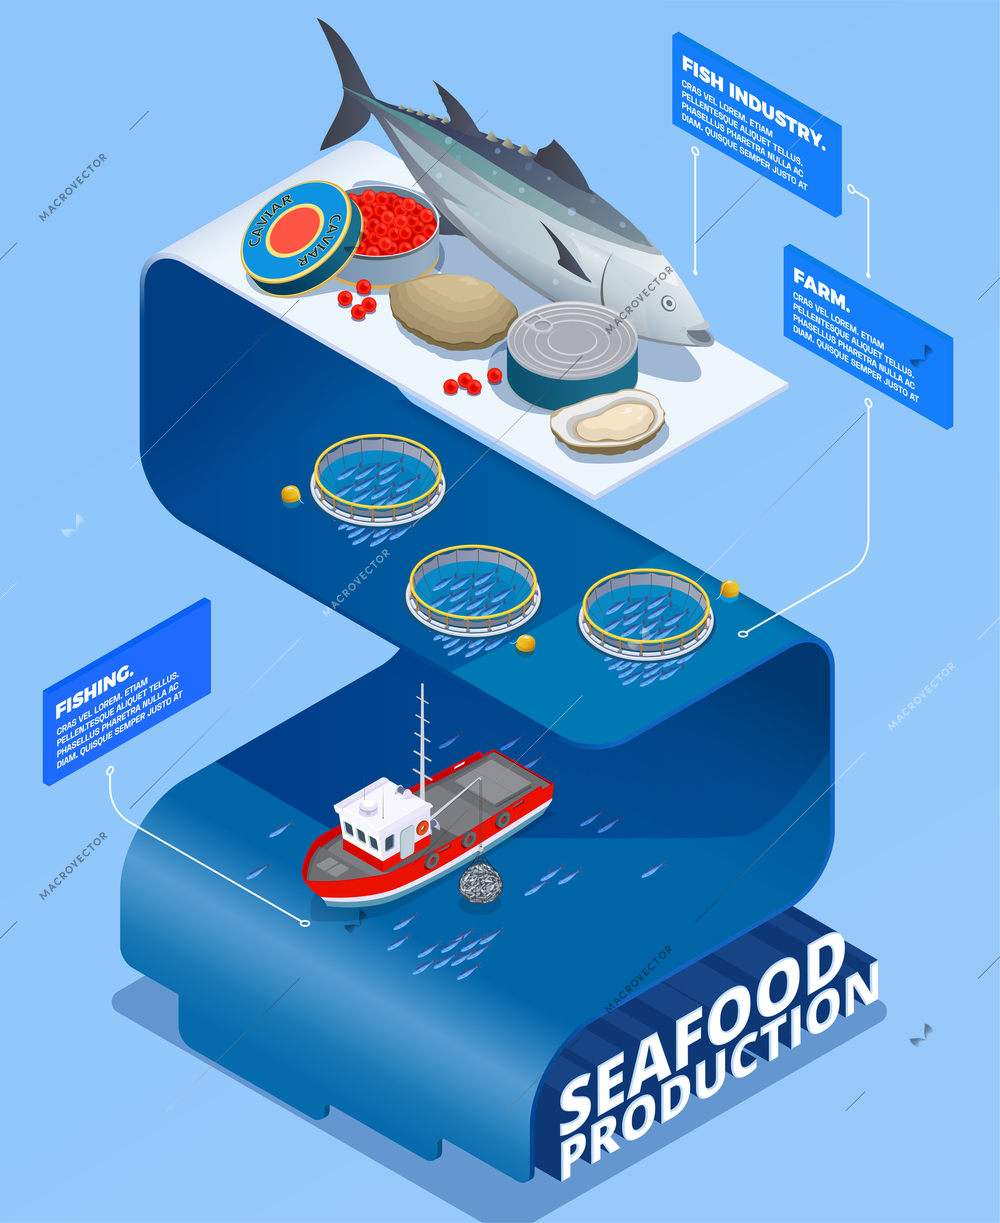 Fish industry seafood production isometric infographics with text caption blocks and images of fishing drift nets vector illustration